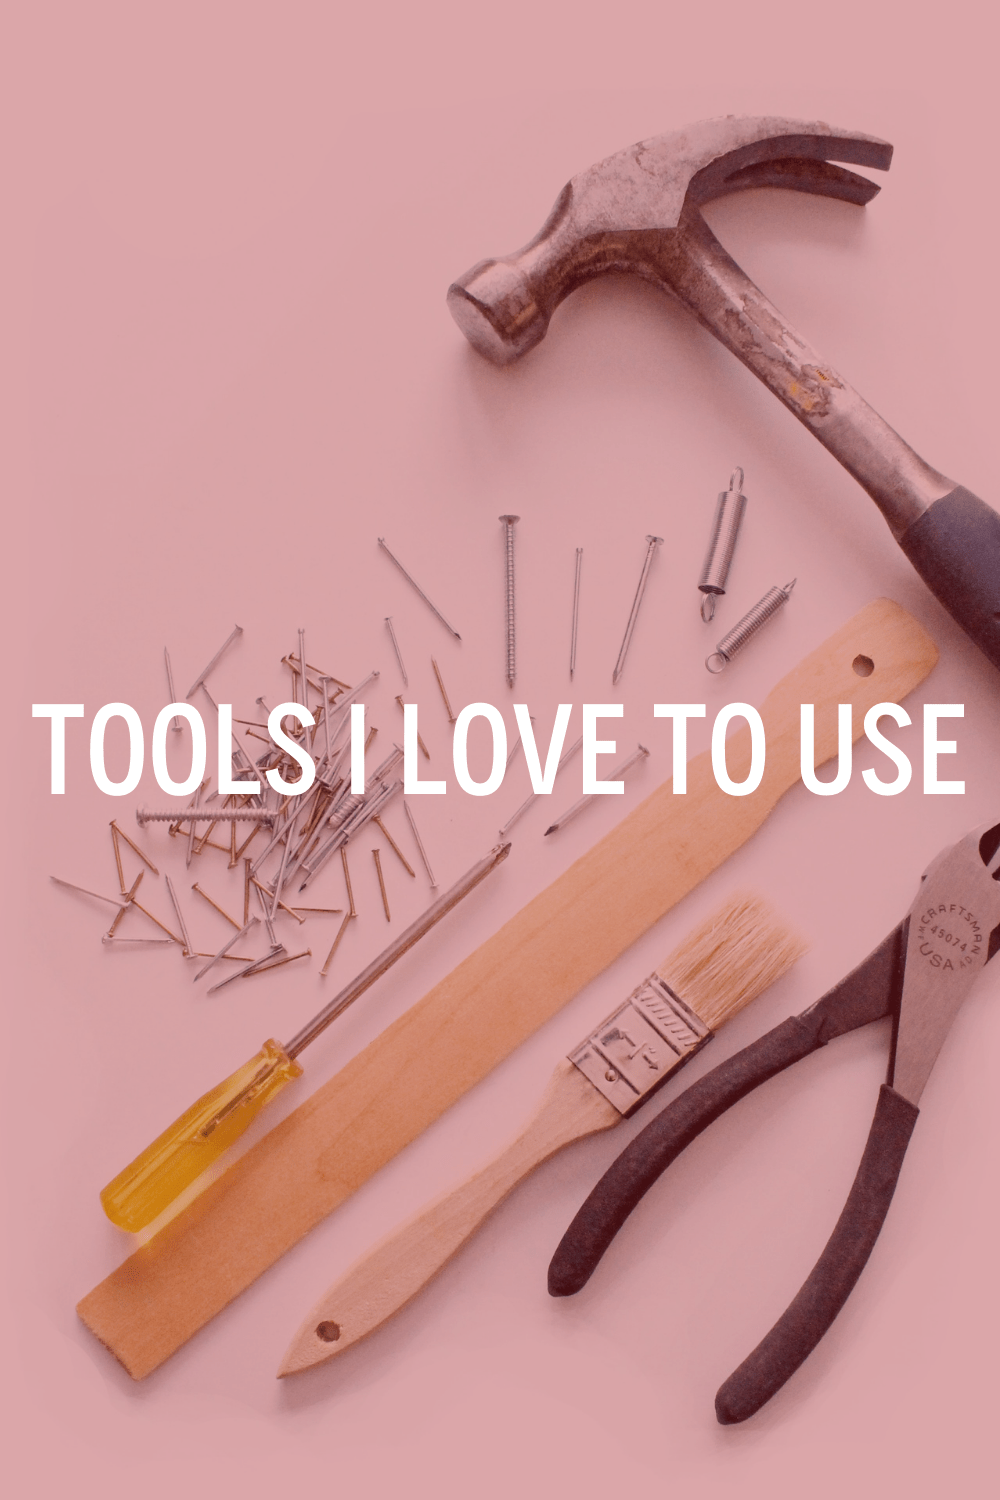 Online tools that I love to use